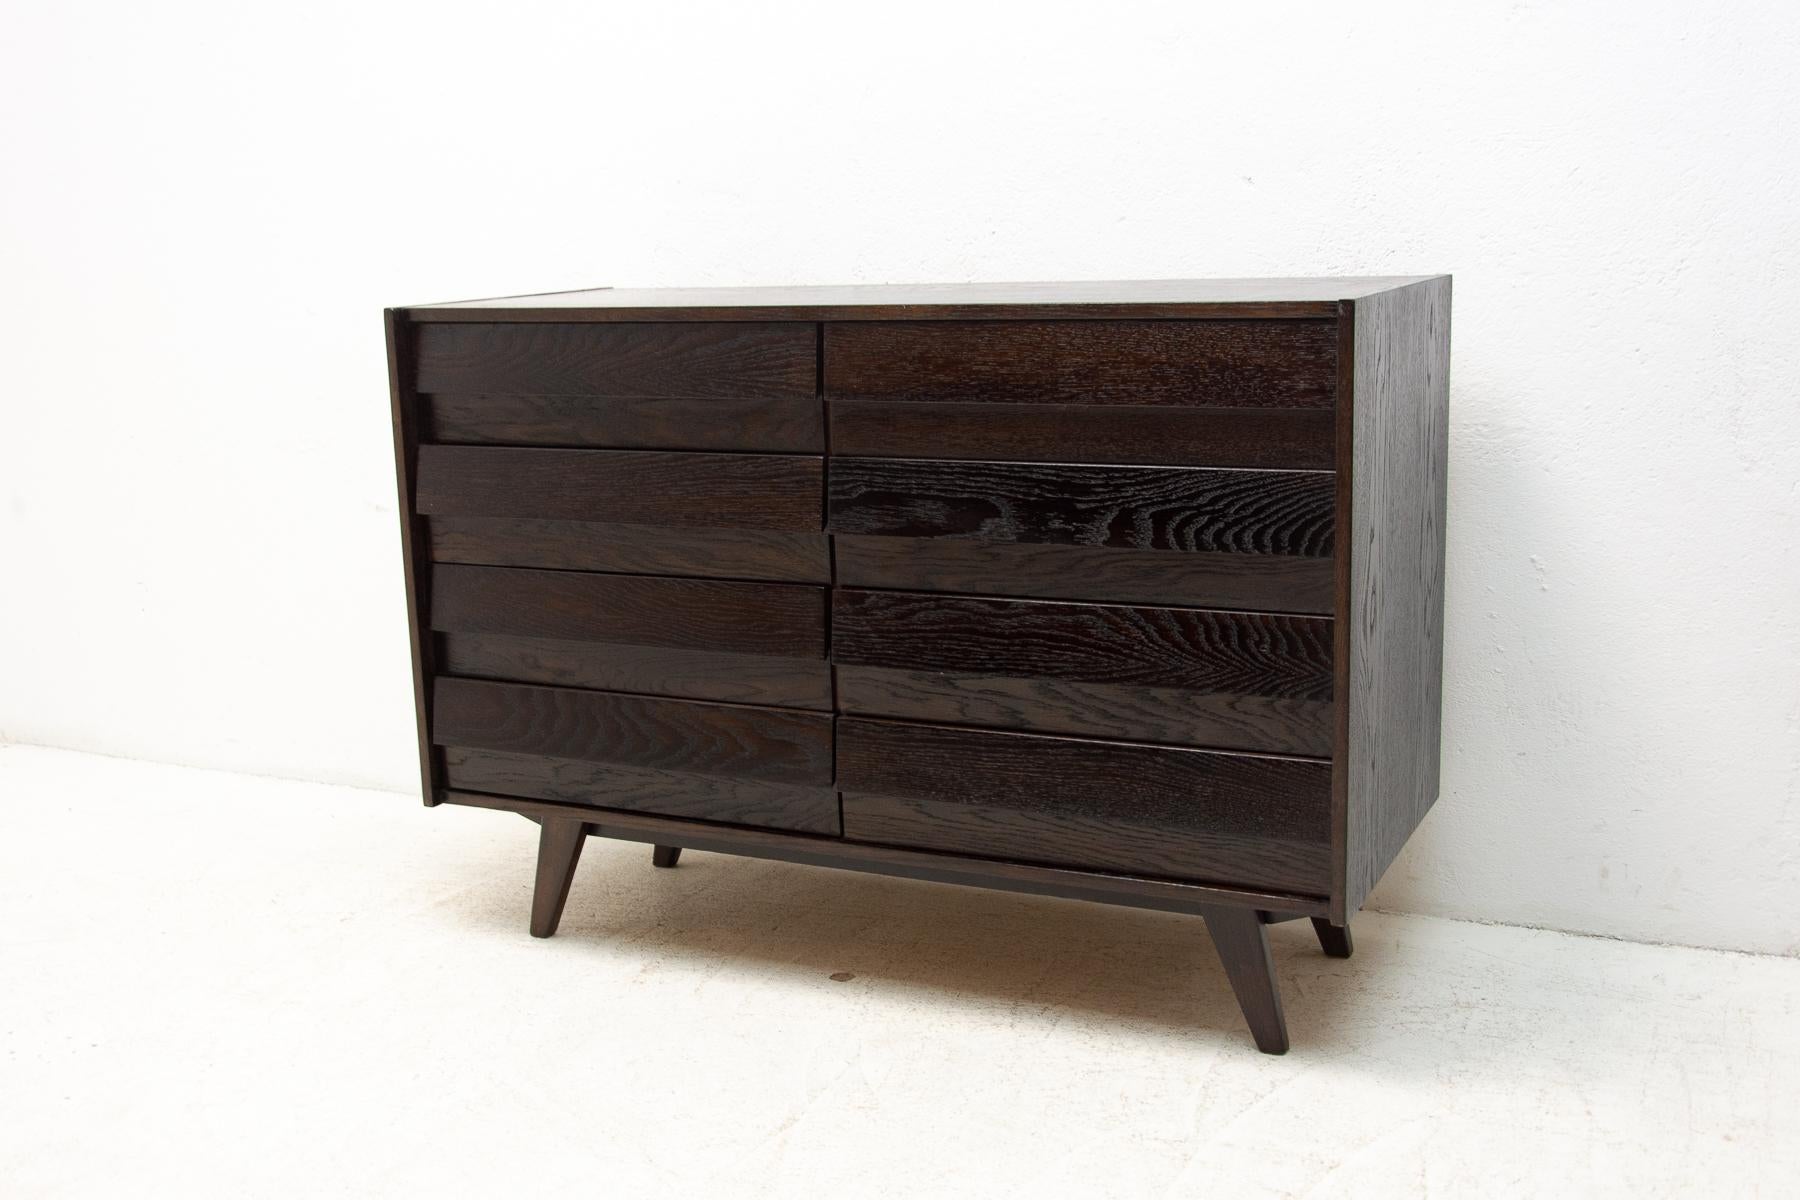 midcentury chest of drawers, model no. U-453, designed by Jirí Jiroutek for Interiér Praha. It was made in the former Czechoslovakia in the 1960´s. This model is associated with the world-famous EXPO 58 in Brussels. It´s made of oak wood and and